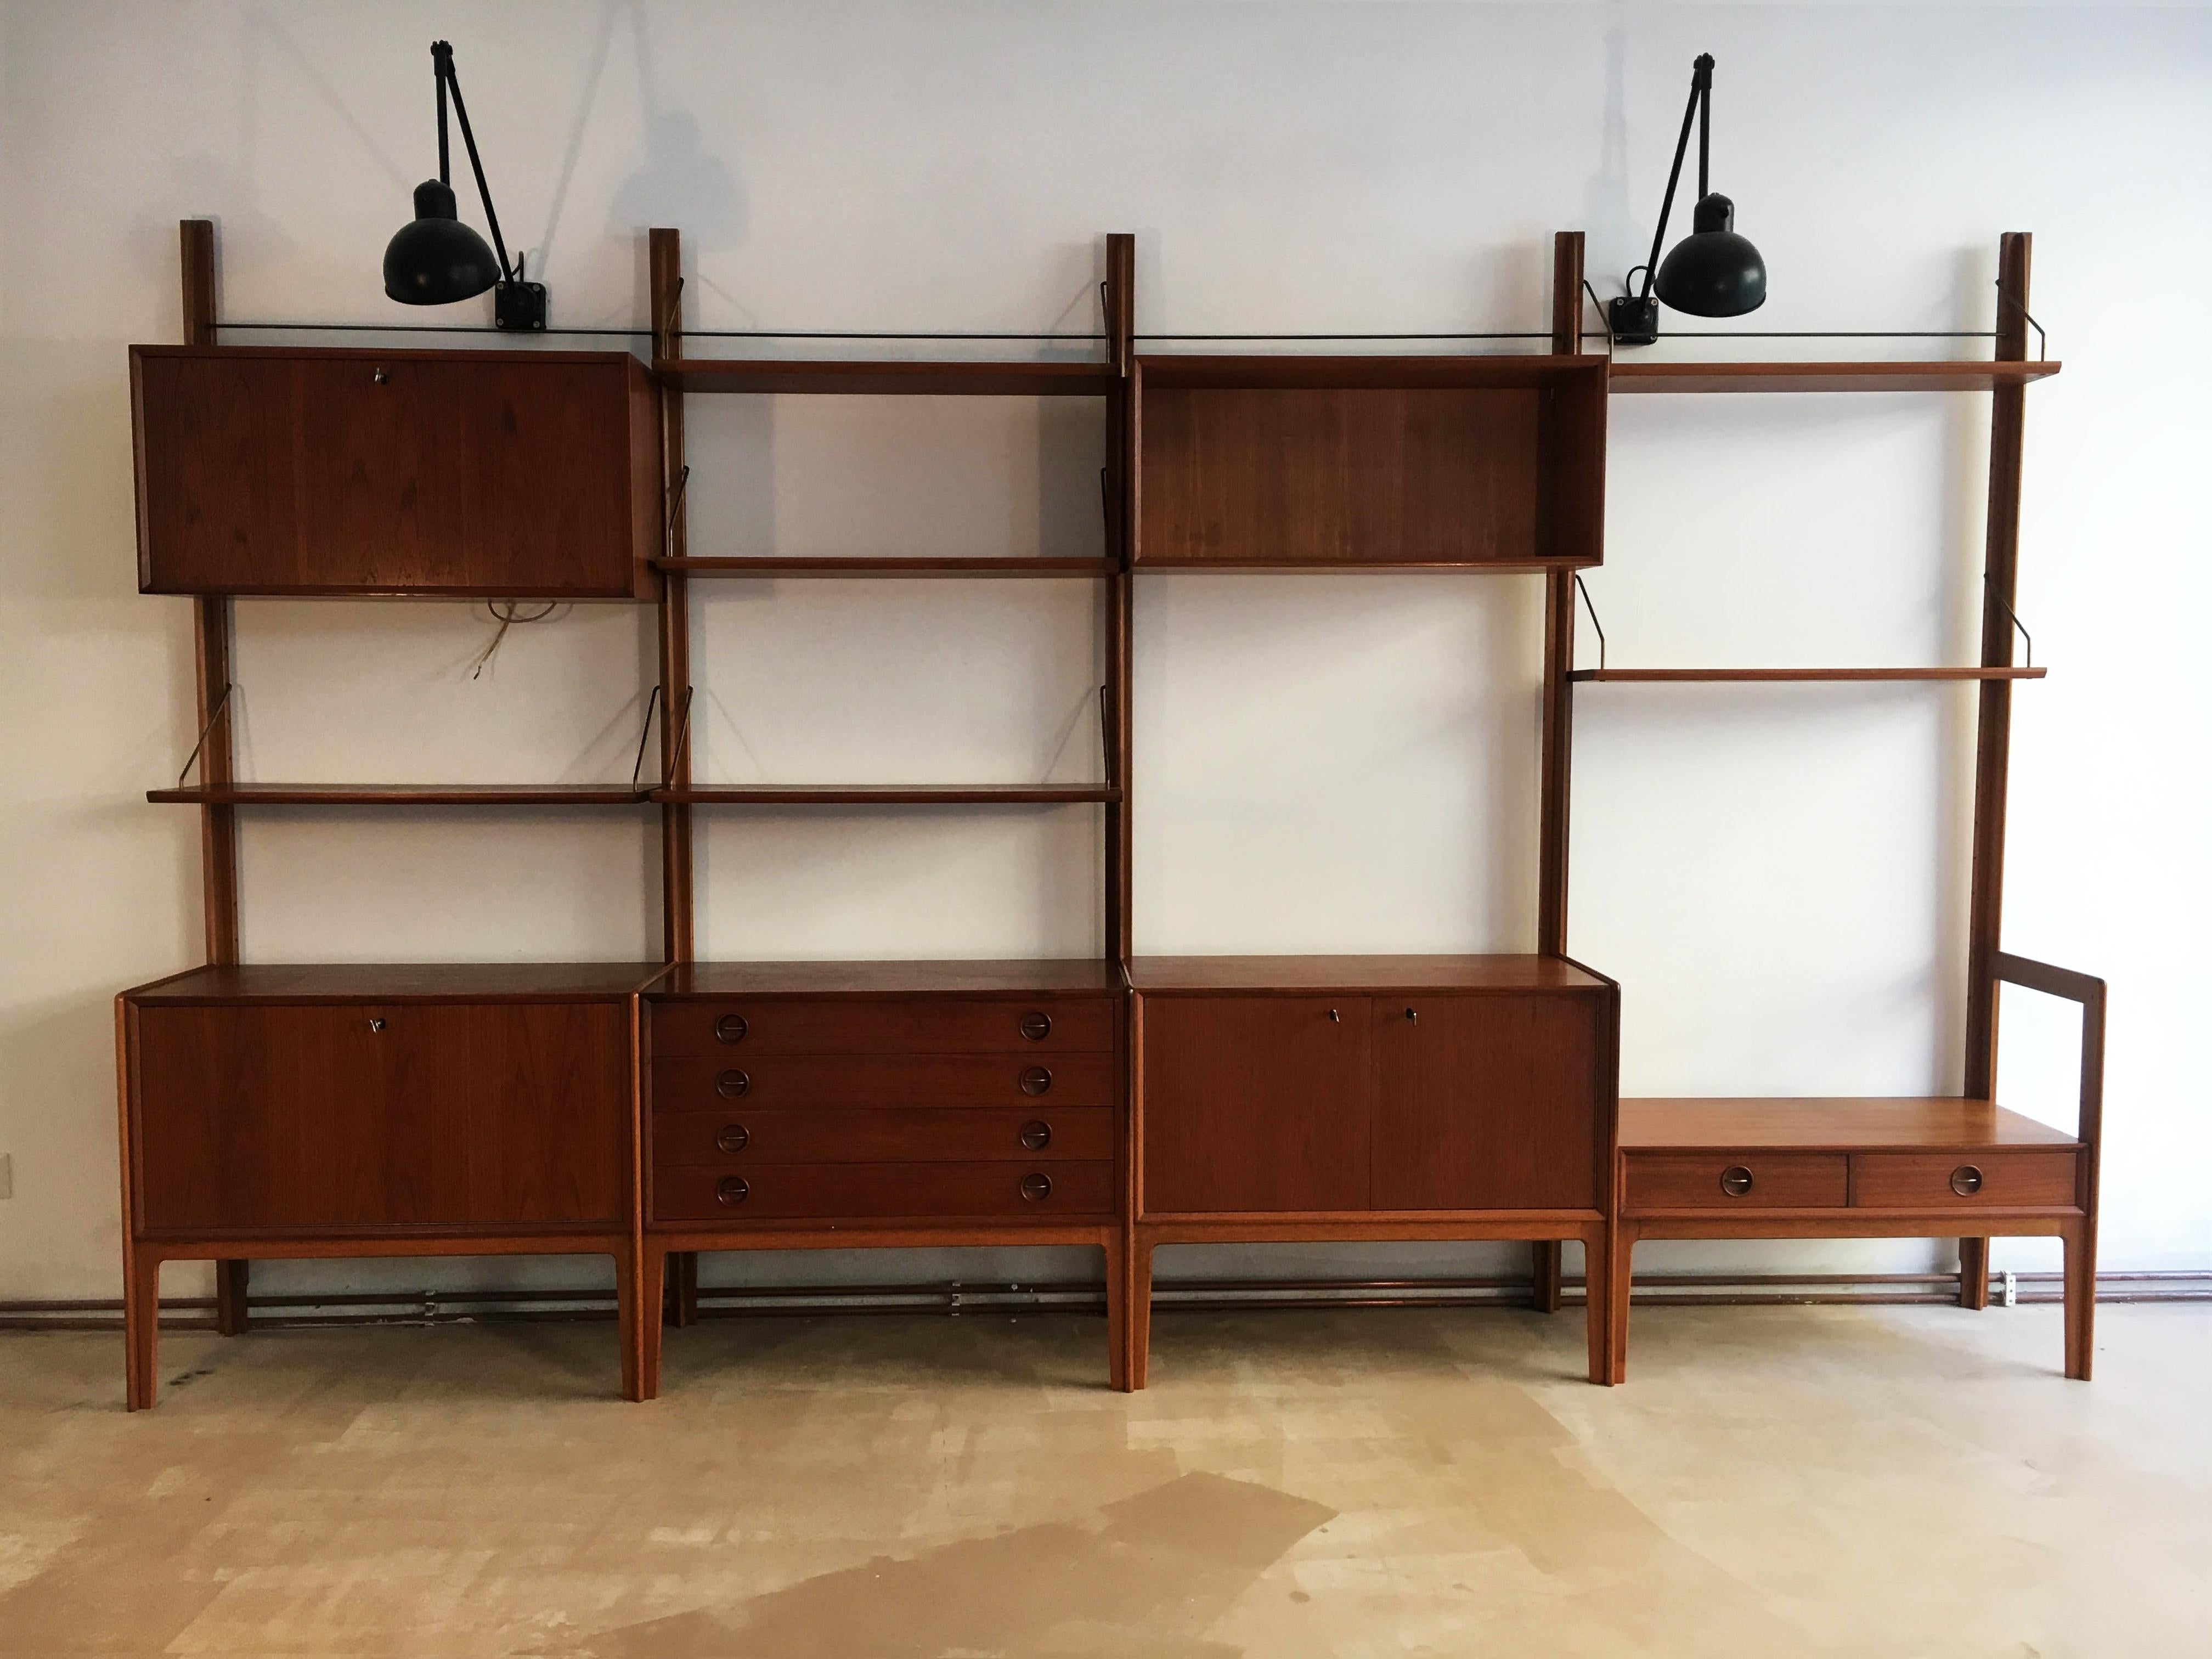 Original freestanding teak wall unit by Fredrik A. Kayser for Gustav Bahus, Norway 1960s. The system is designed to be completely freestanding, no mounting to a wall is required. Can be used as a room divider as well.  